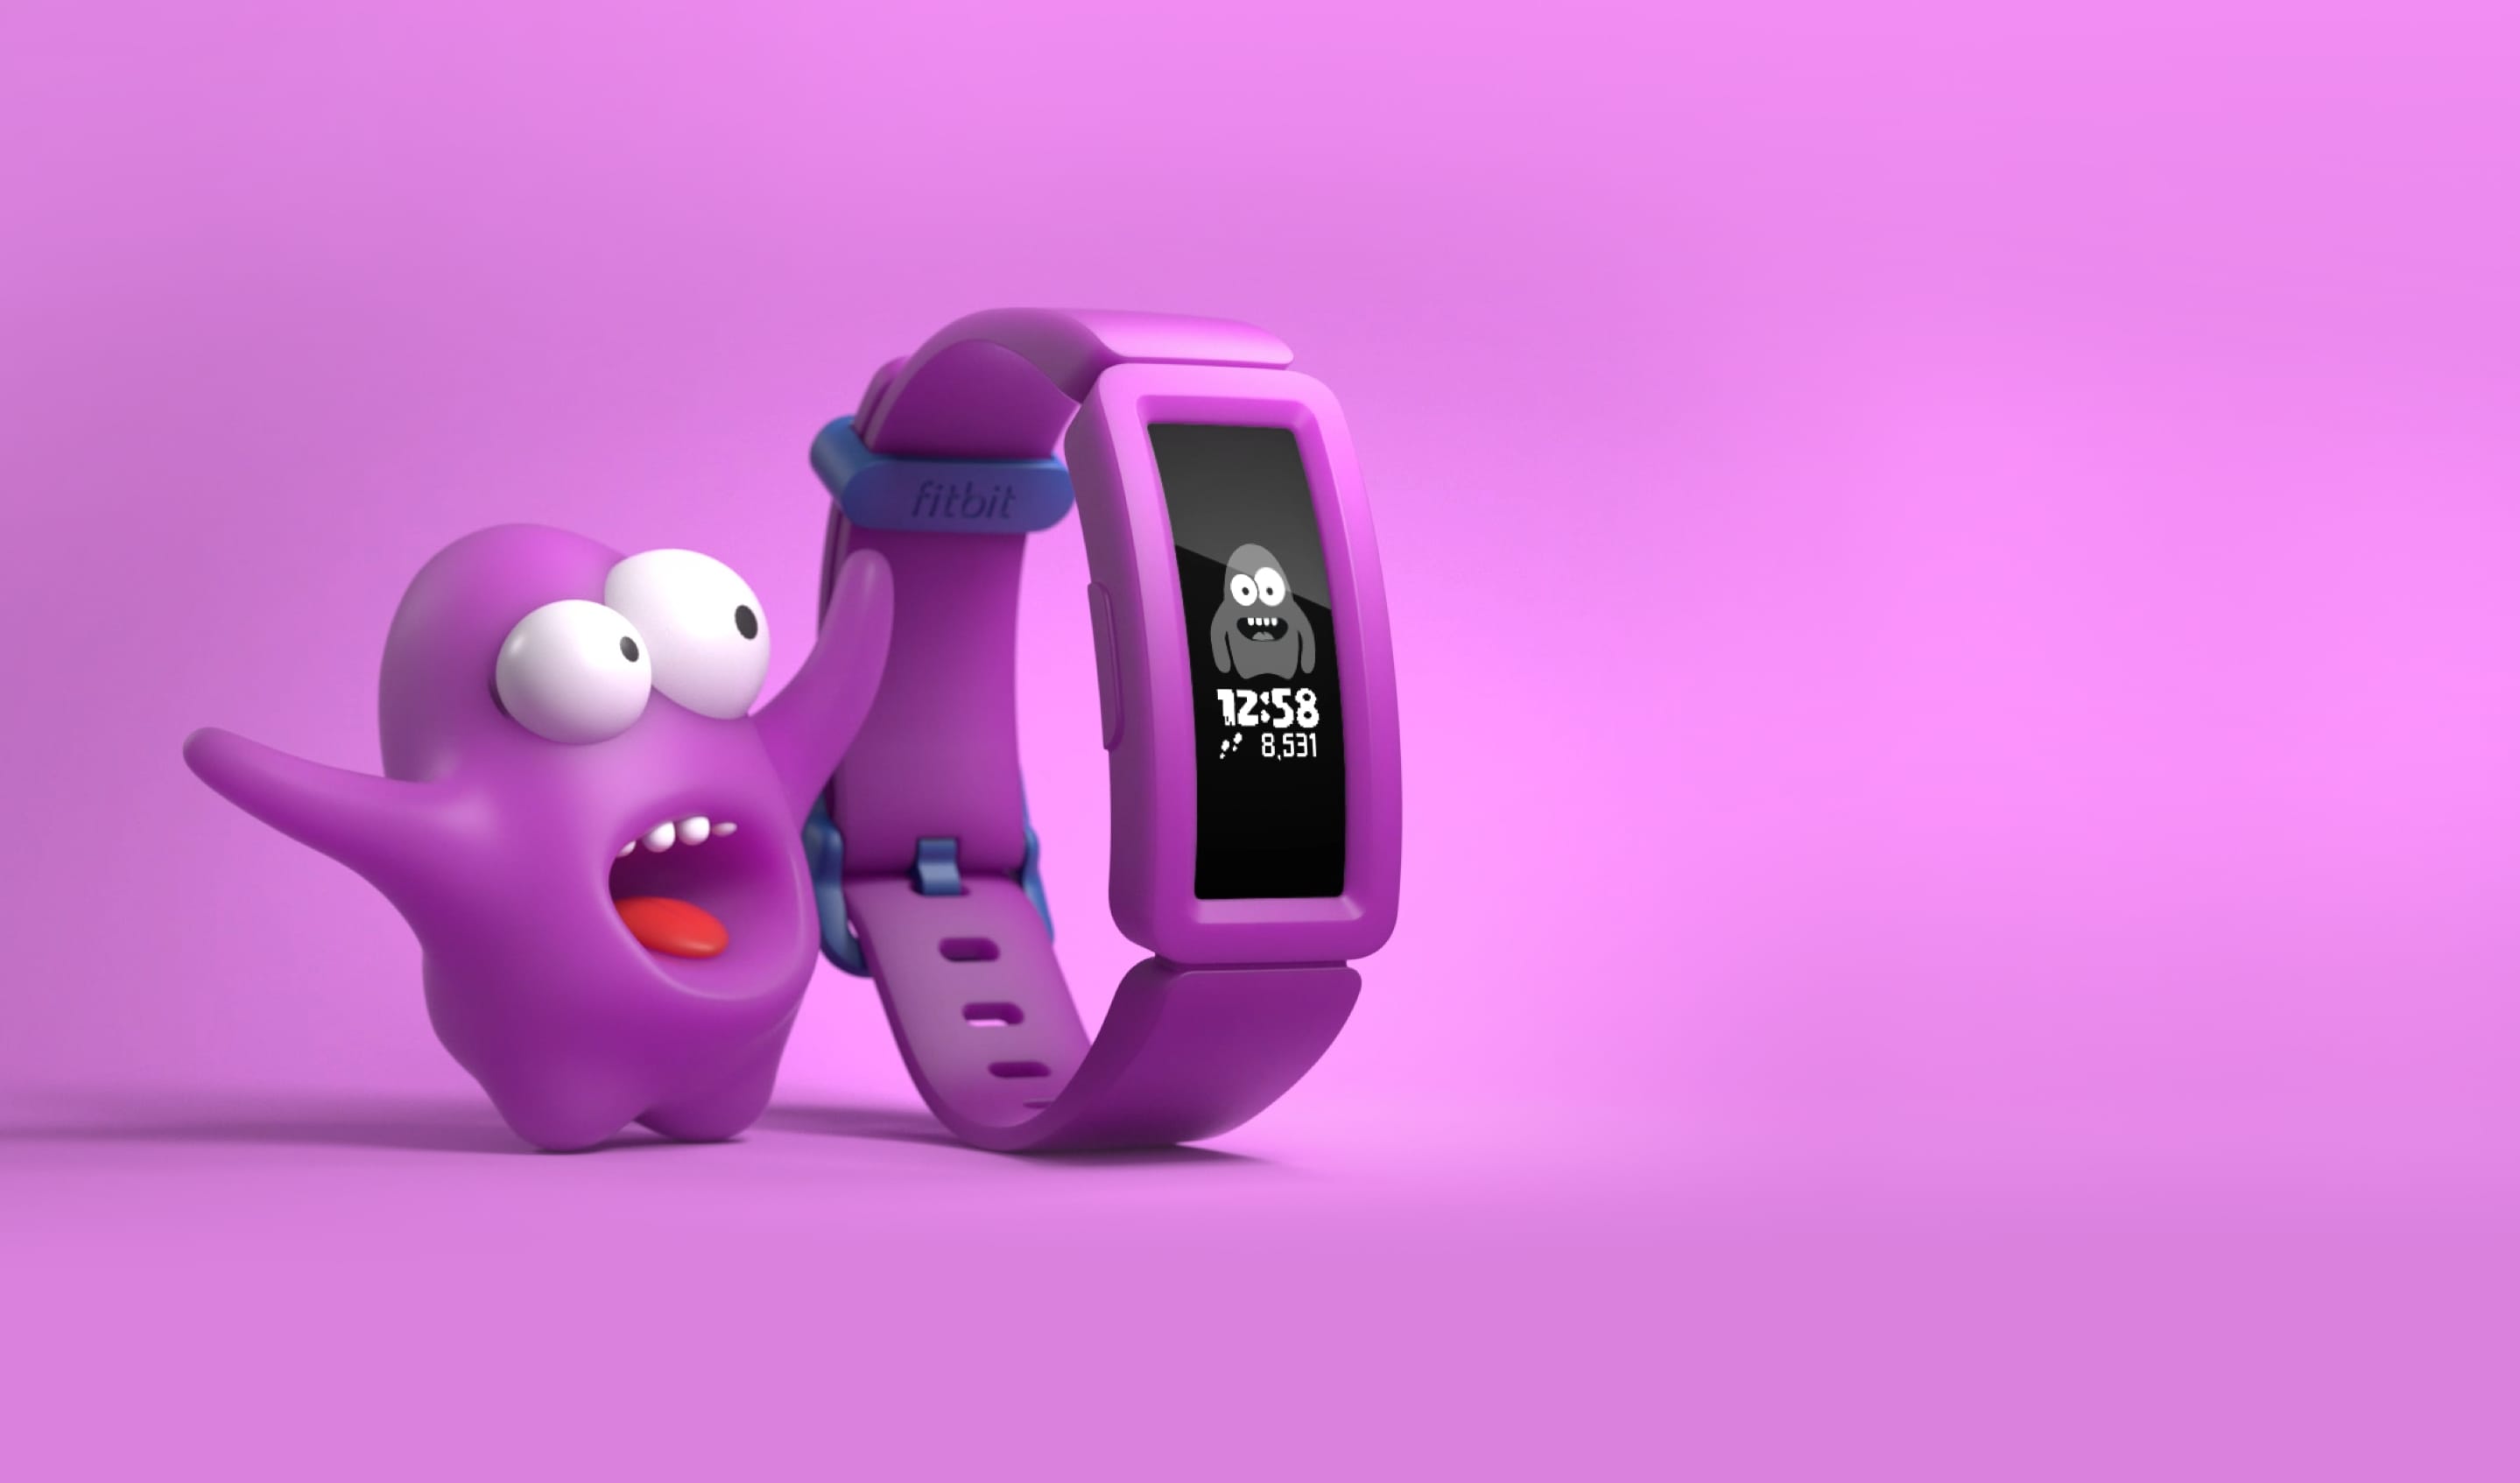 childs fitbit